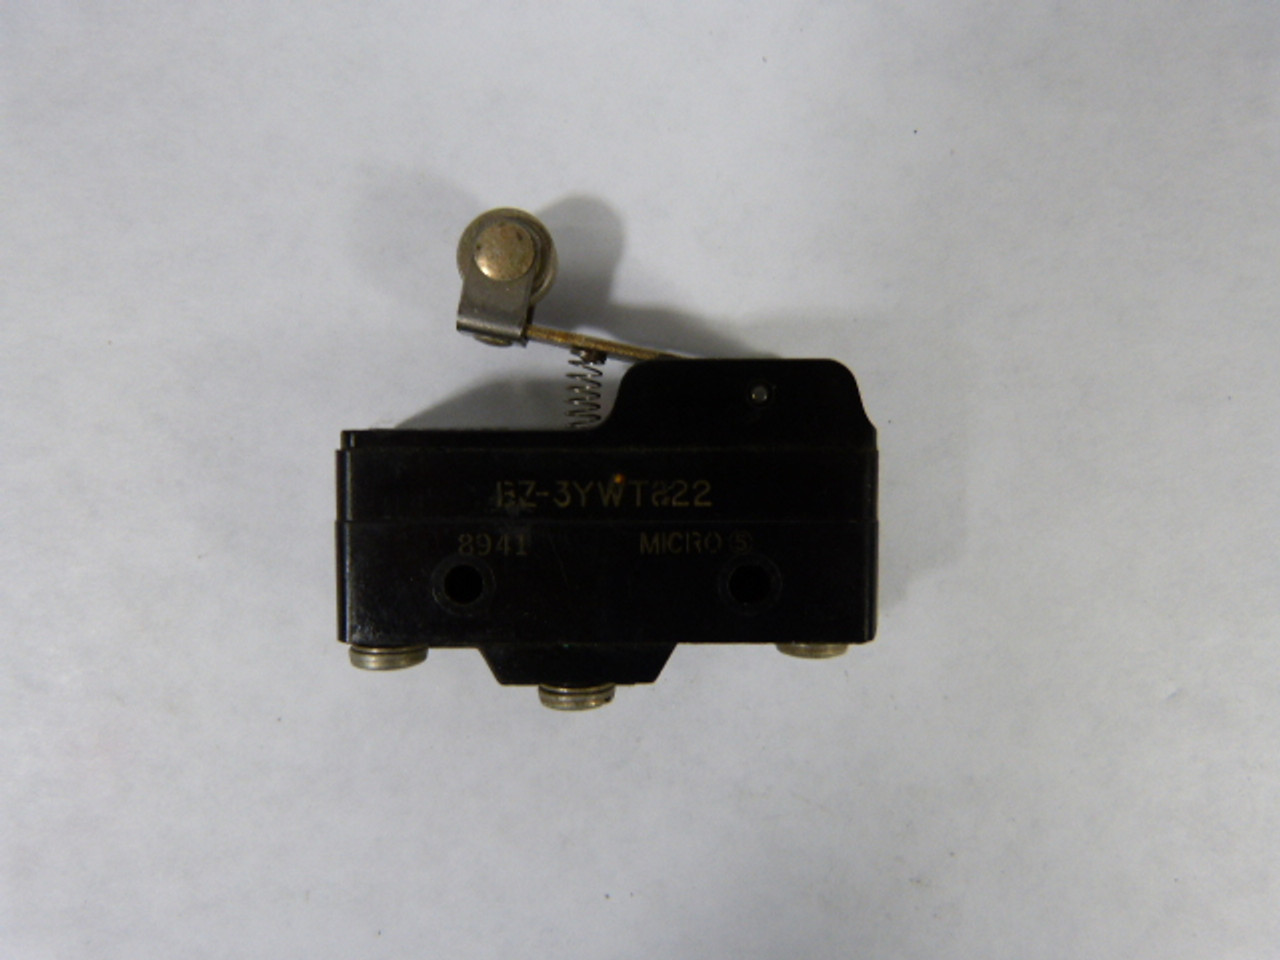 Microswitch BZ-3YWT822 Limit Switch with Roller Lever 5amp USED